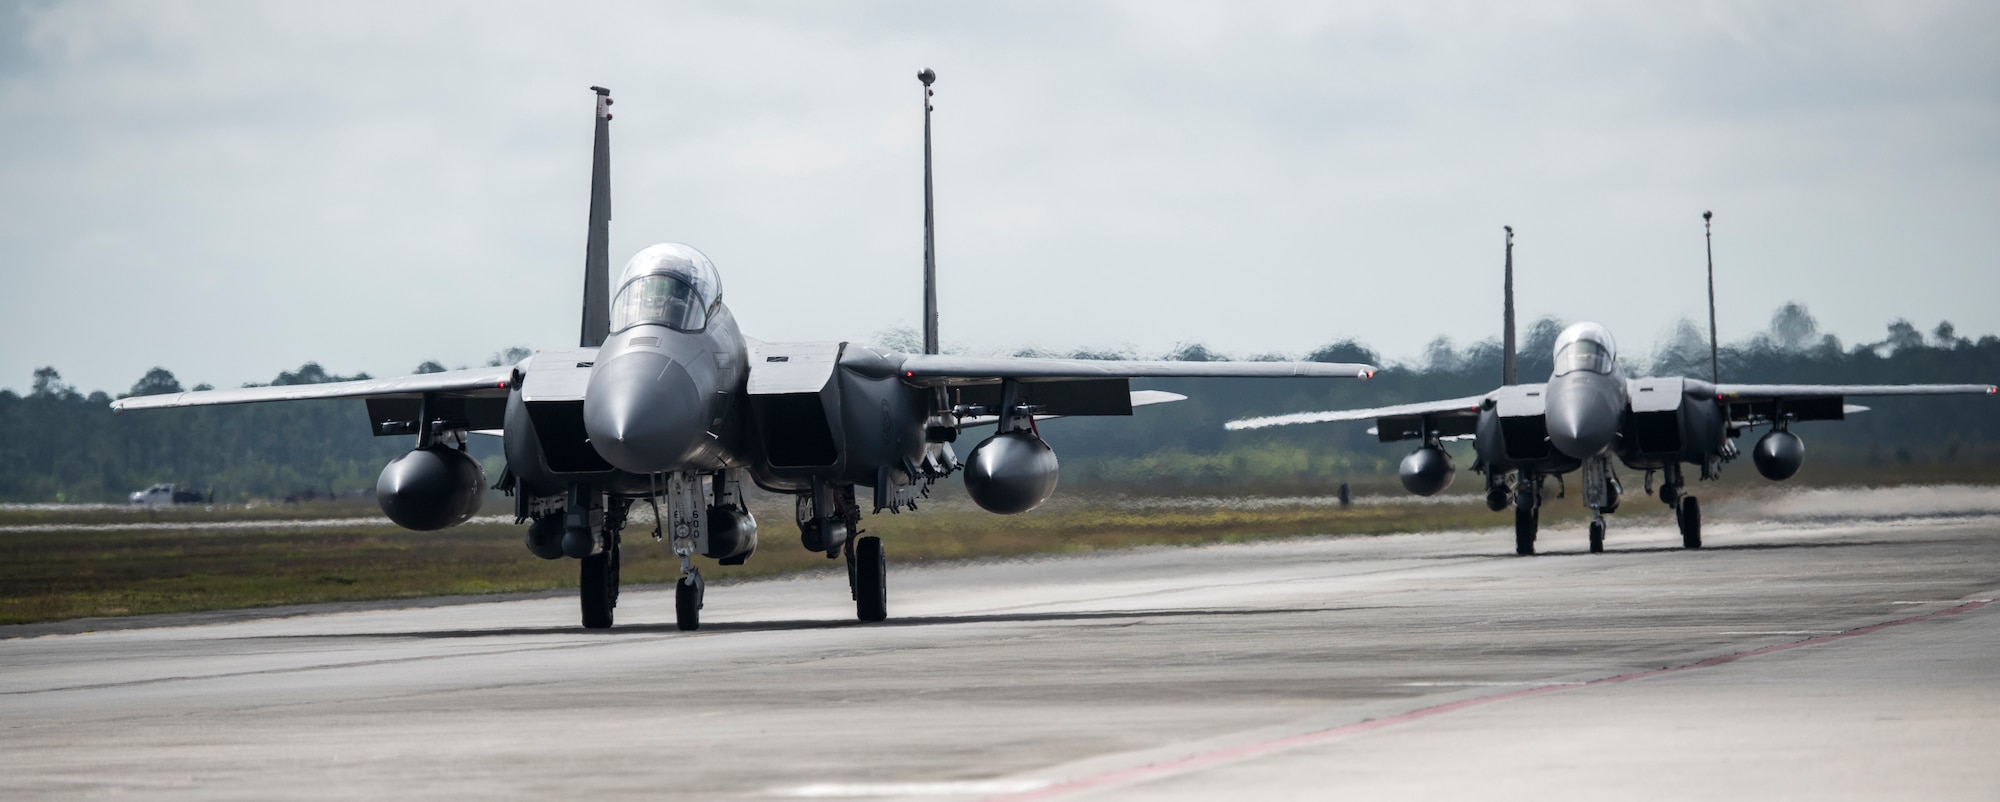 Image of two F-15E Strike Eagles taxying down the runway at Tyndall Air Force Base, Florida, April 3, 2018. Combat Archer and Hammer tests both air-to-air and air-to-ground maneuvers. 
(U.S. Air Force photo by Staff Sgt Jeremy L. Mosier)